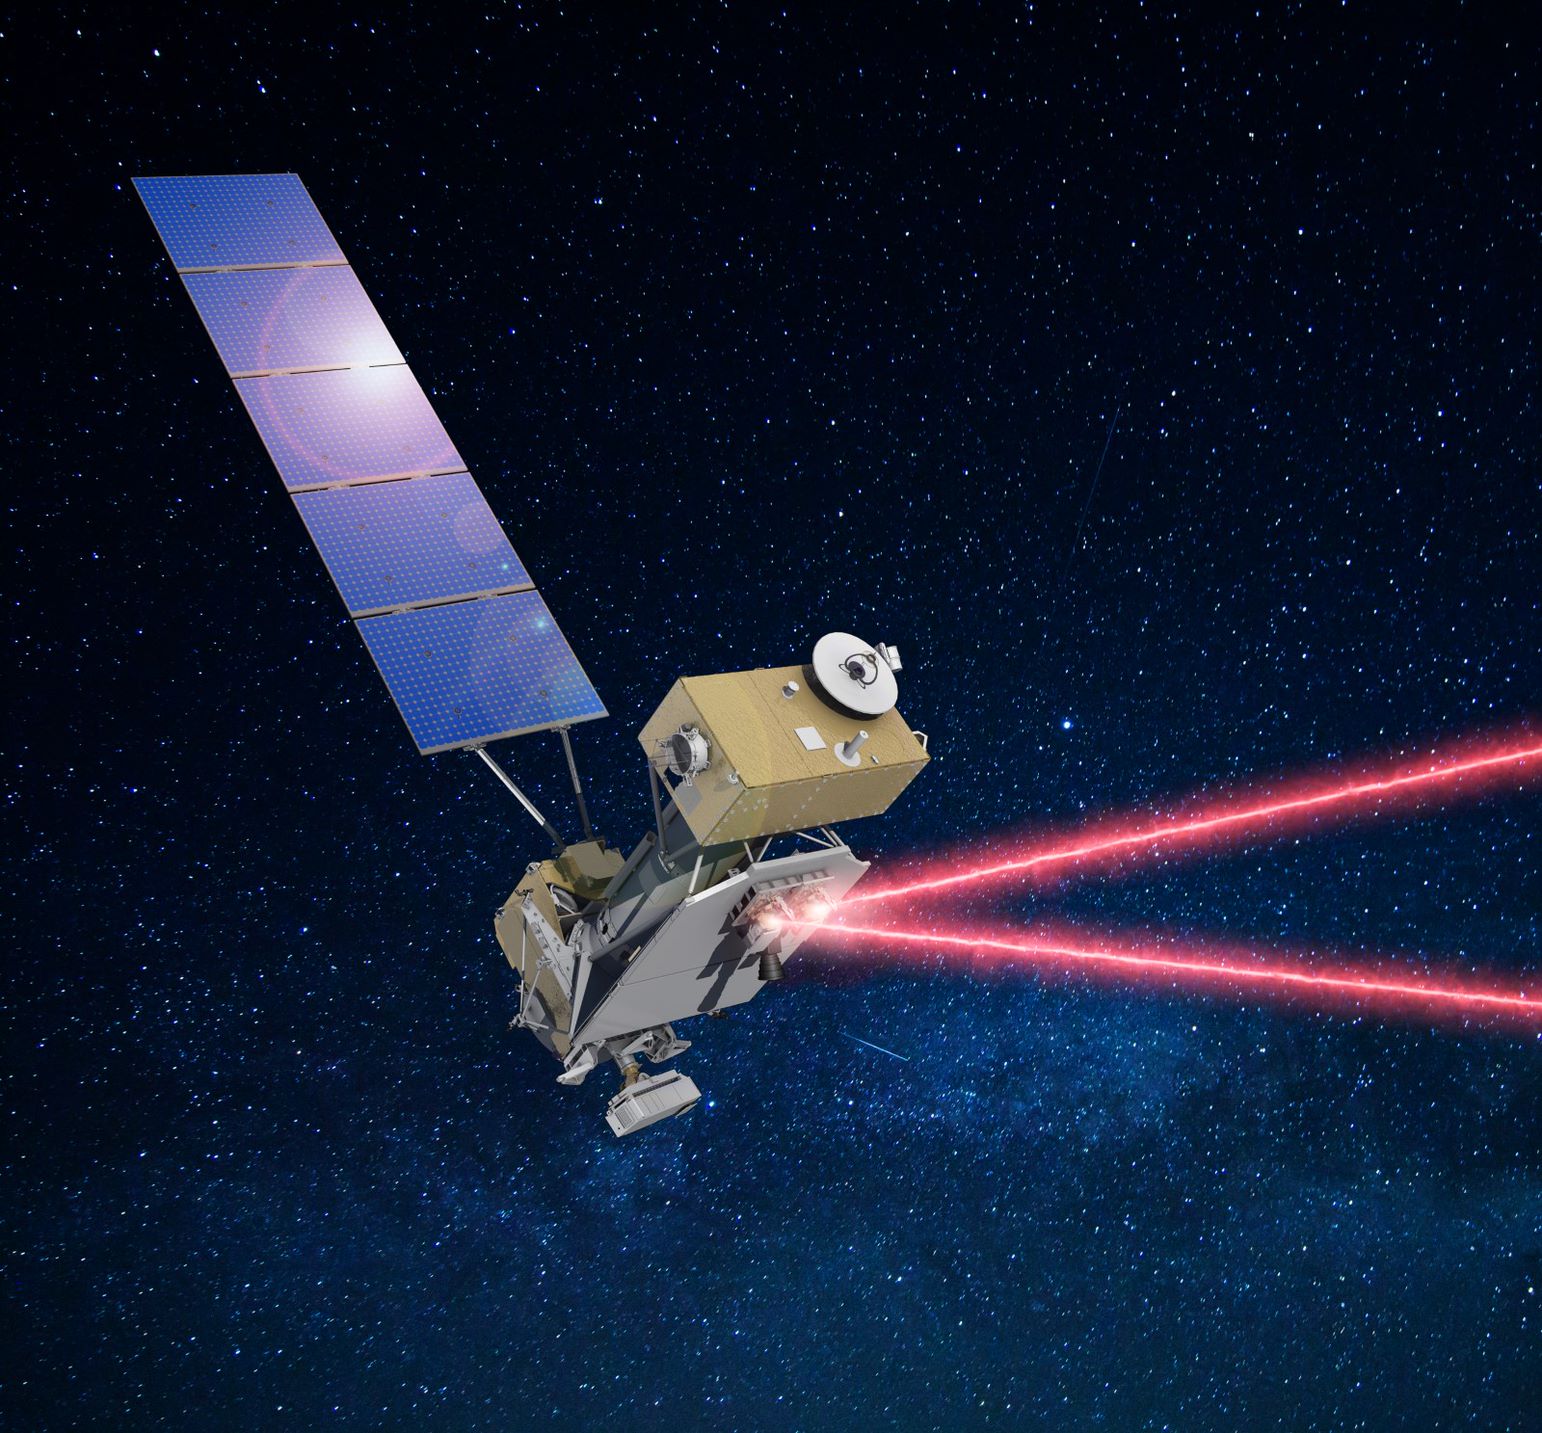 An illustration of a small CubeSat (small satellite) sending laser communications from two red beams going to the right. The satellite is small and shaped like a cereal box, with a long horizontal solar panel extending out. The background is navy and stars are scattered about.